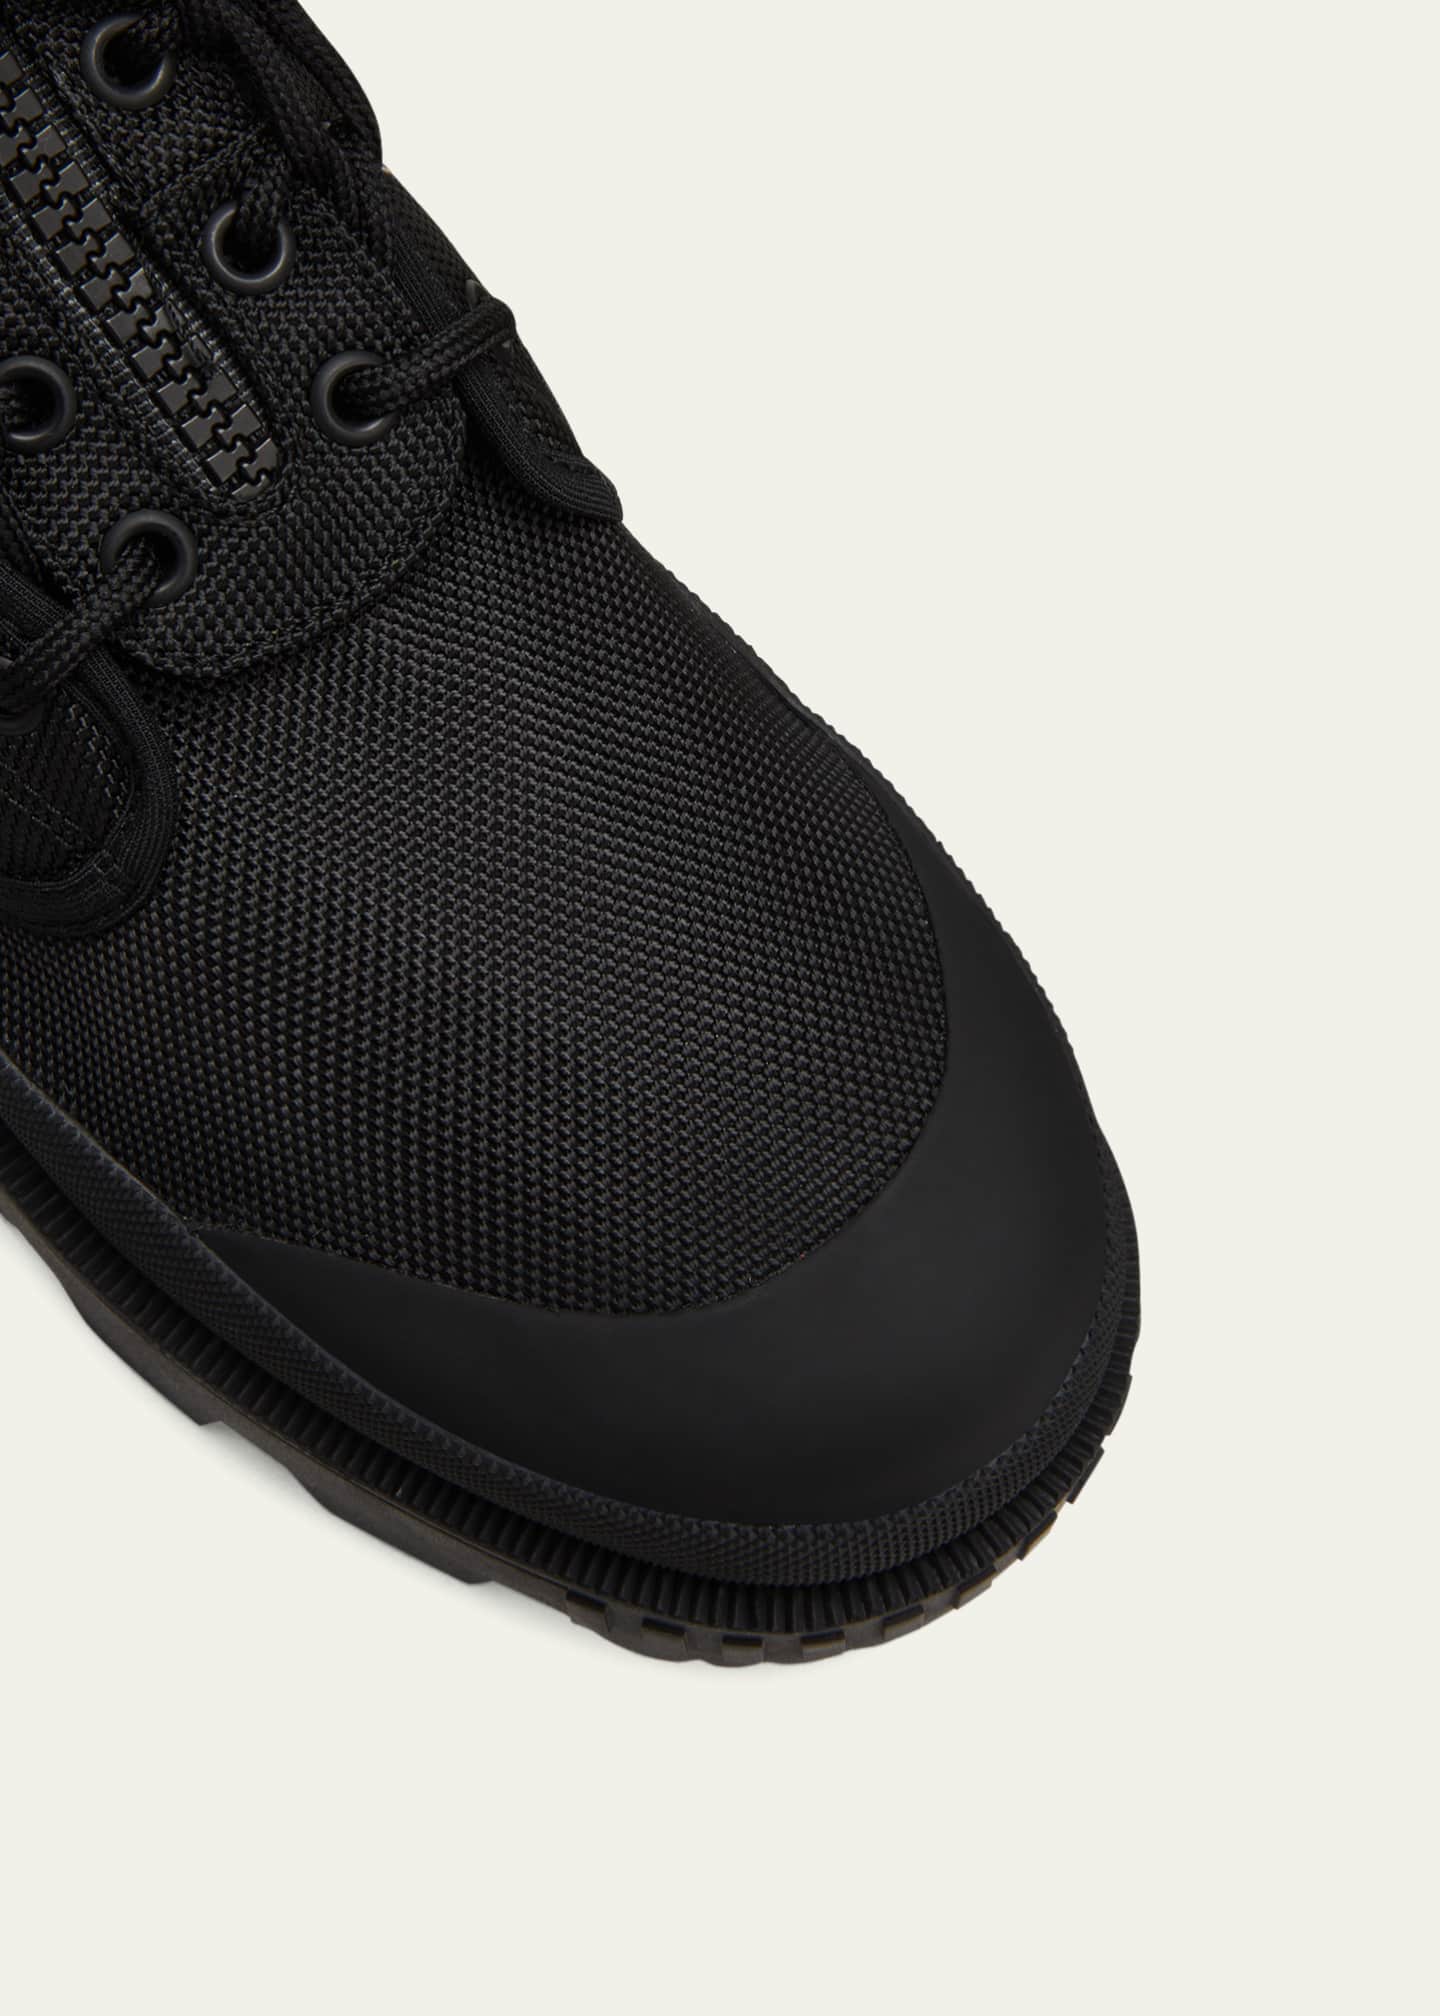 Moncler Genius Hyke Desertyx Ankle Boots